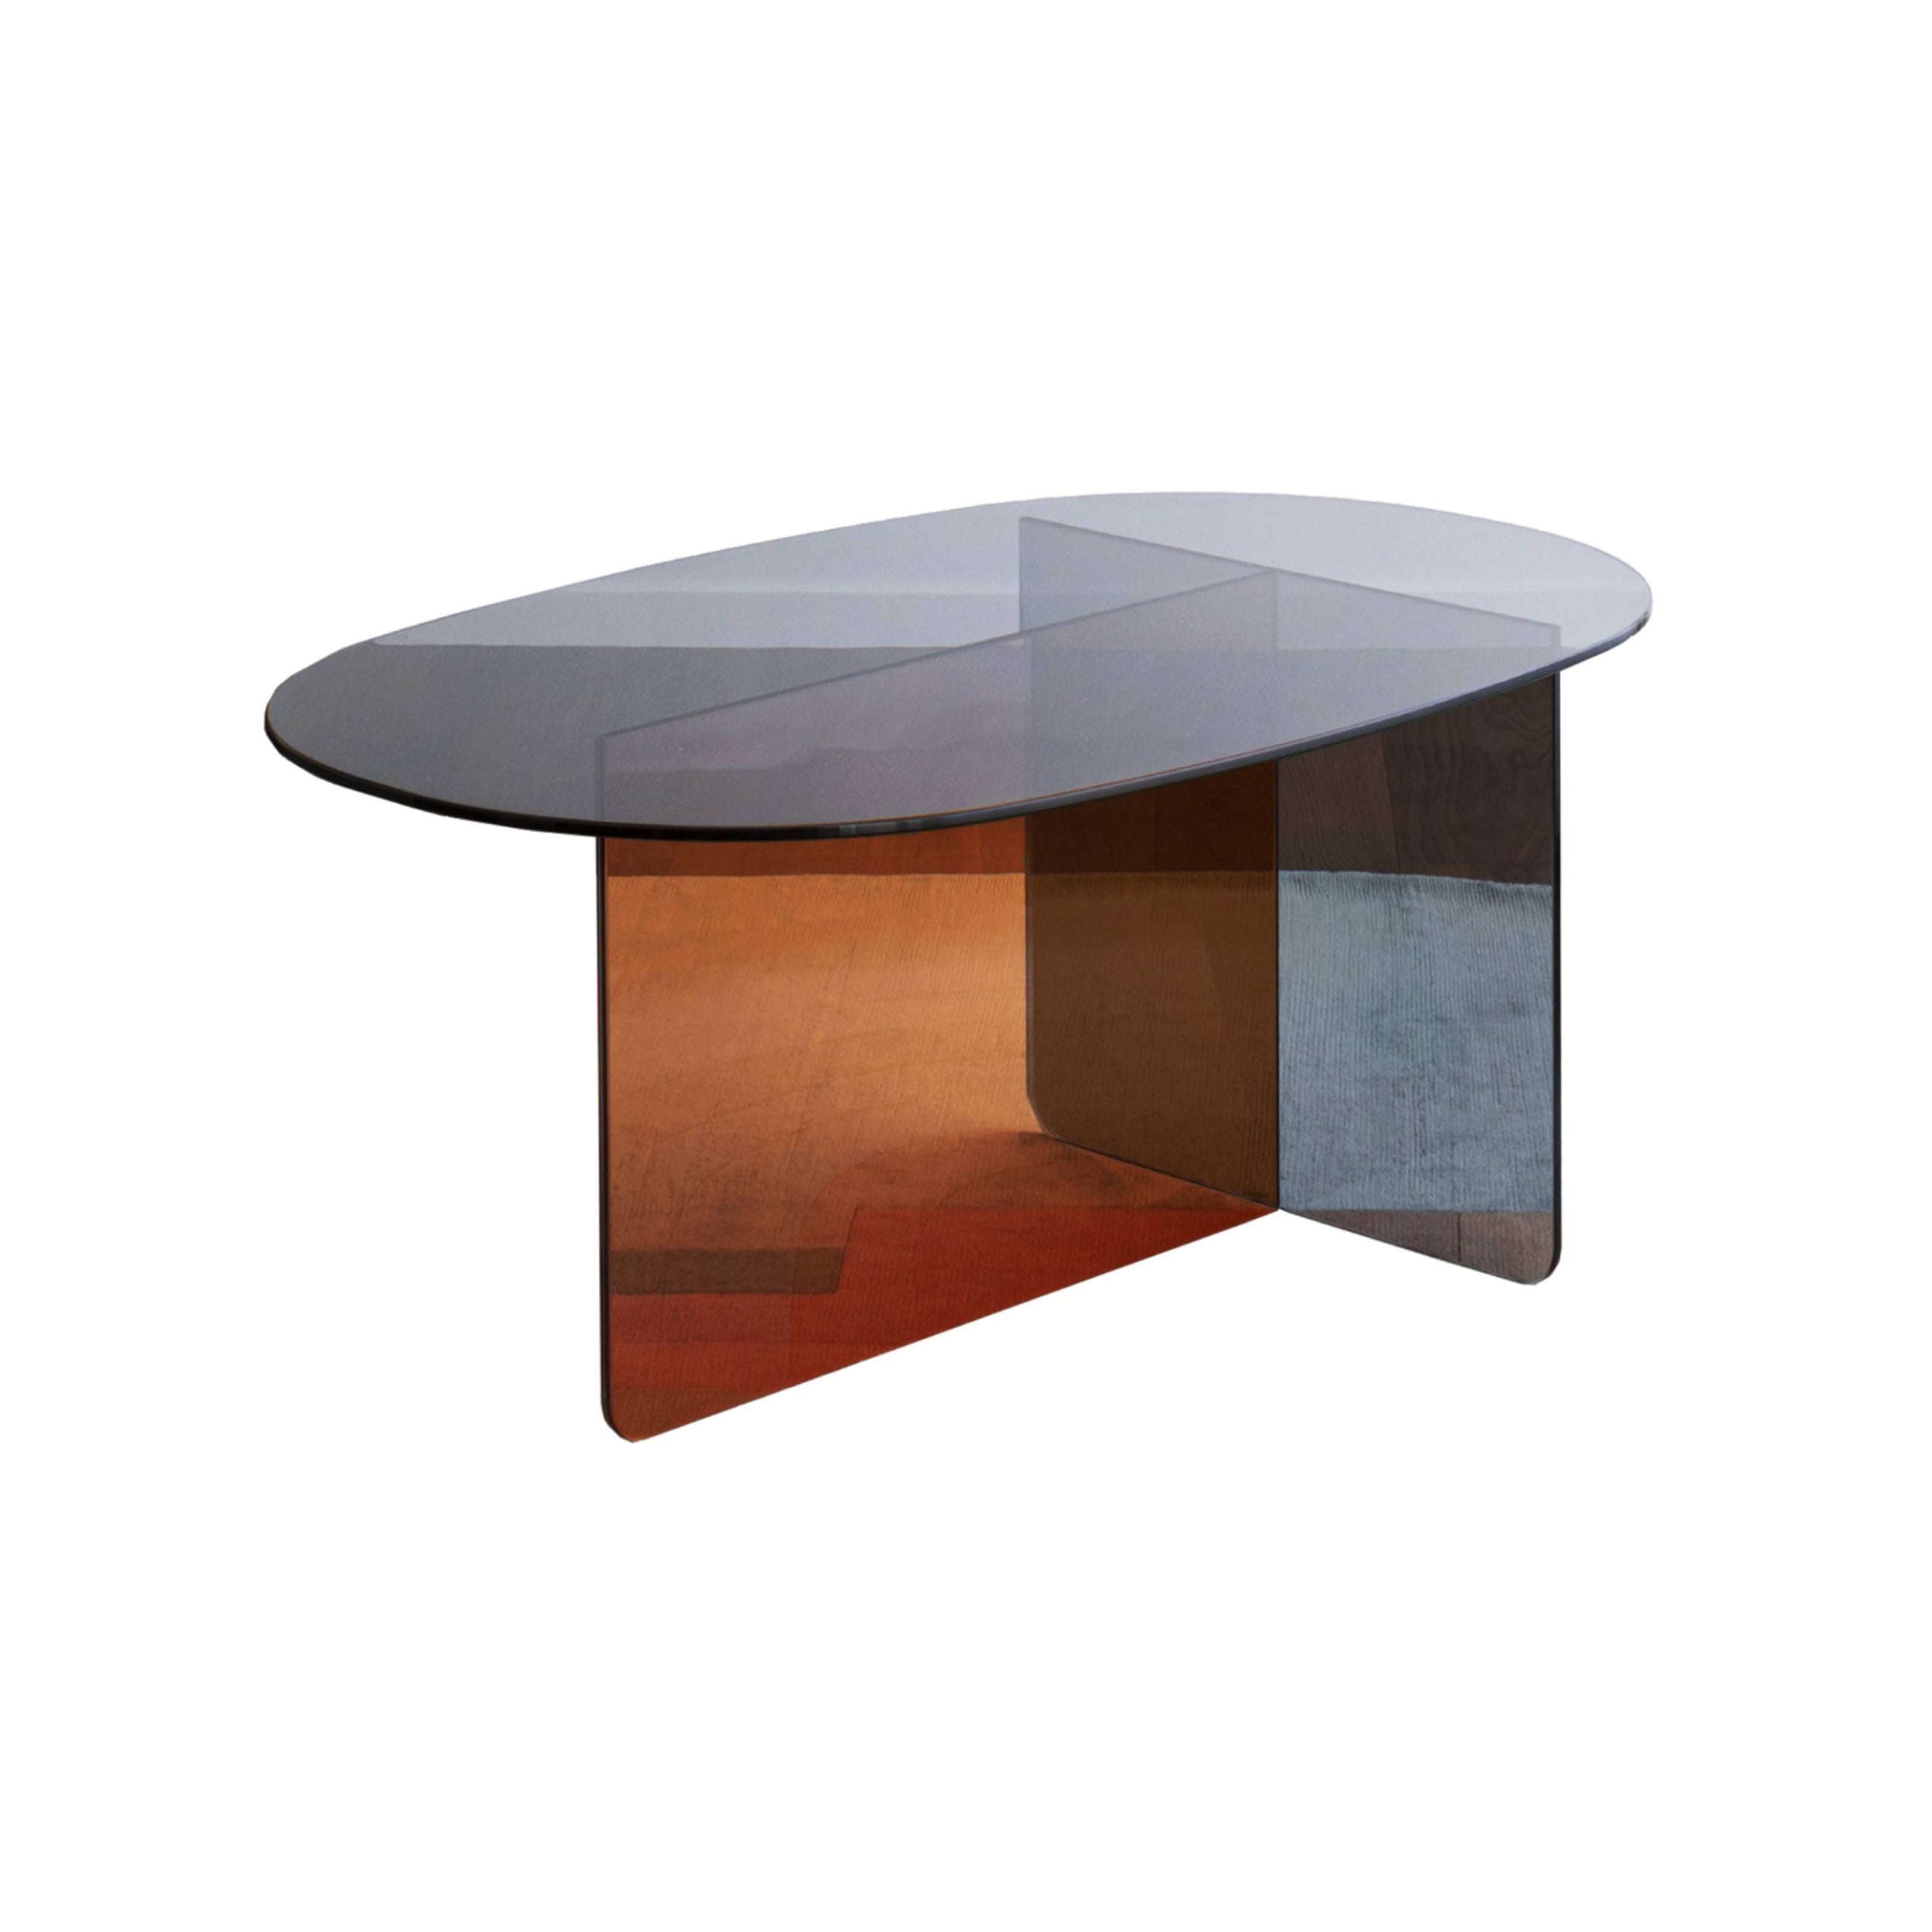 Chap Coffee Table: Large - 35.4